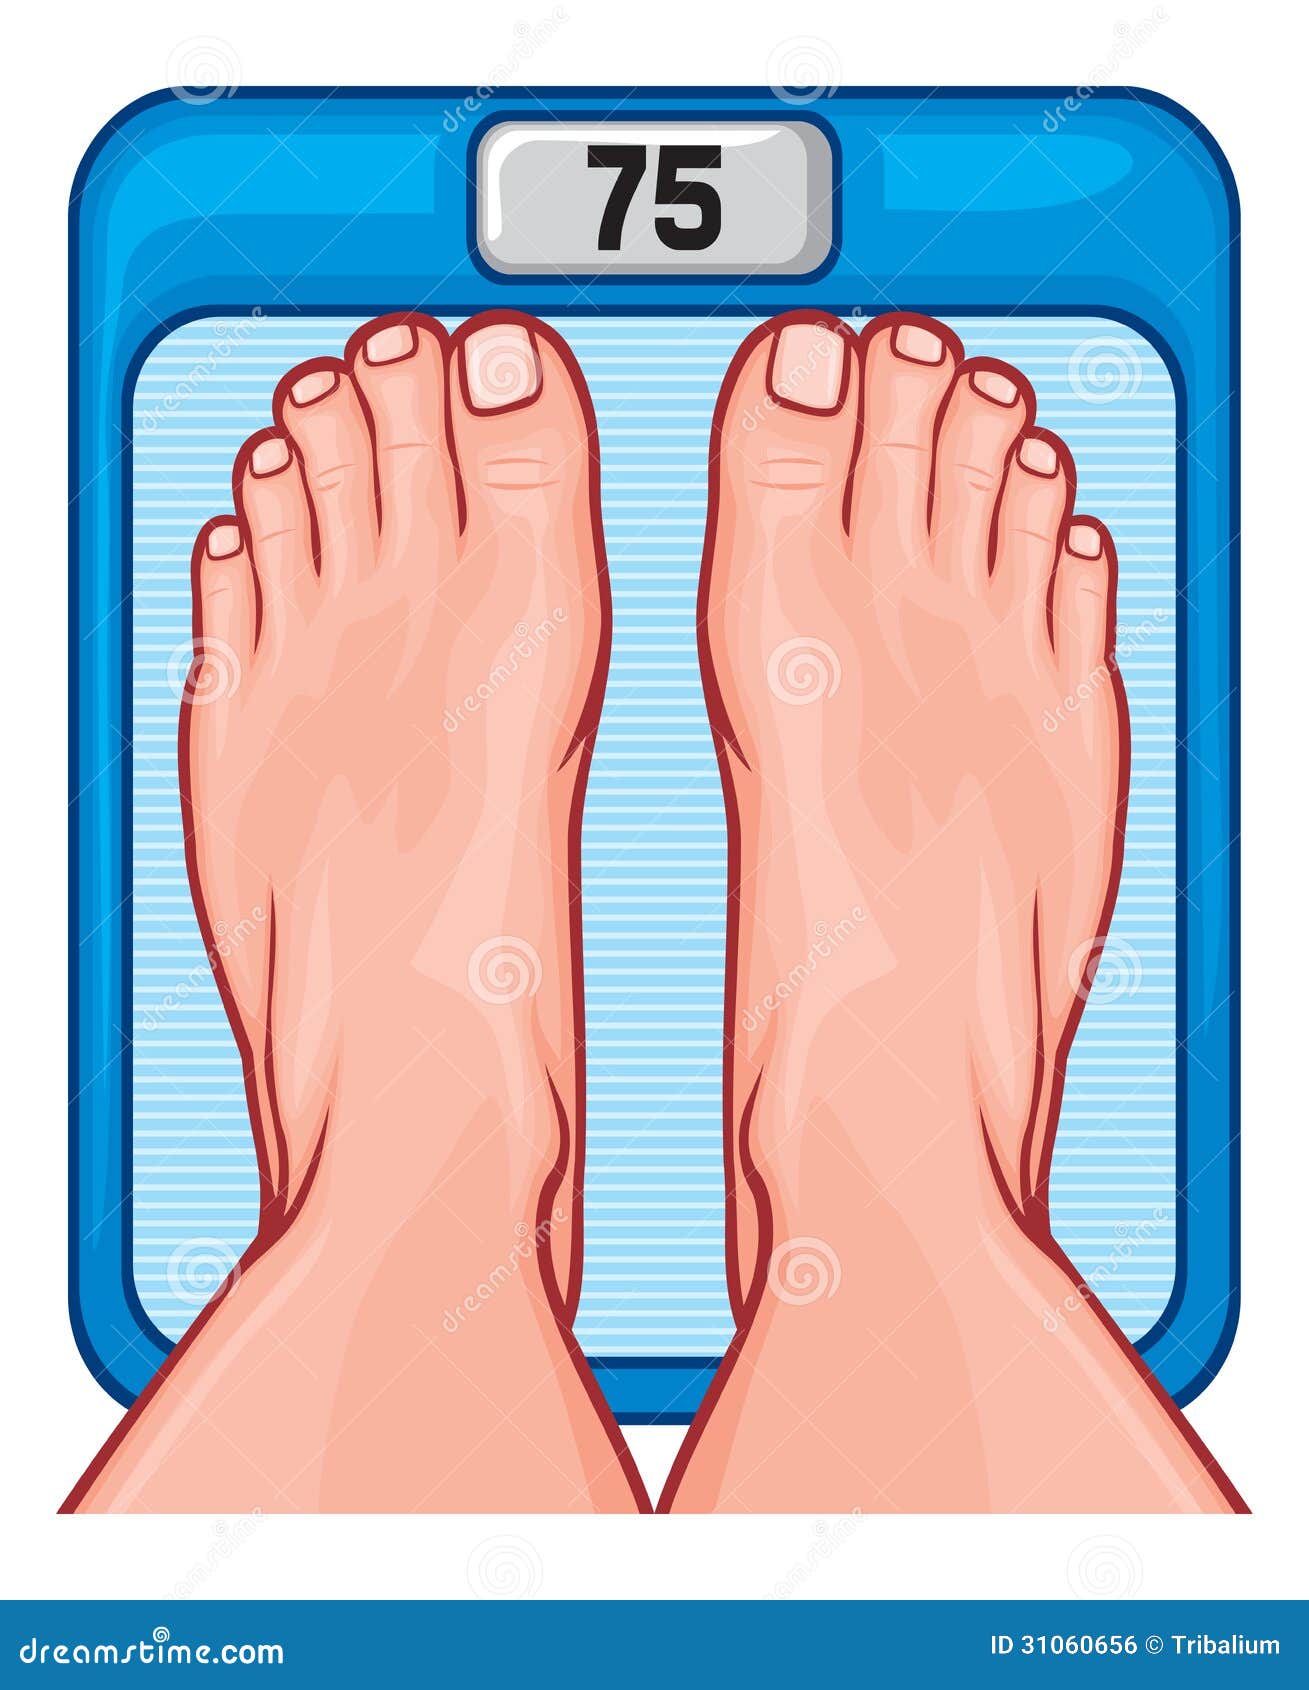 Feet on the scale stock vector. Illustration of weigh - 31060656